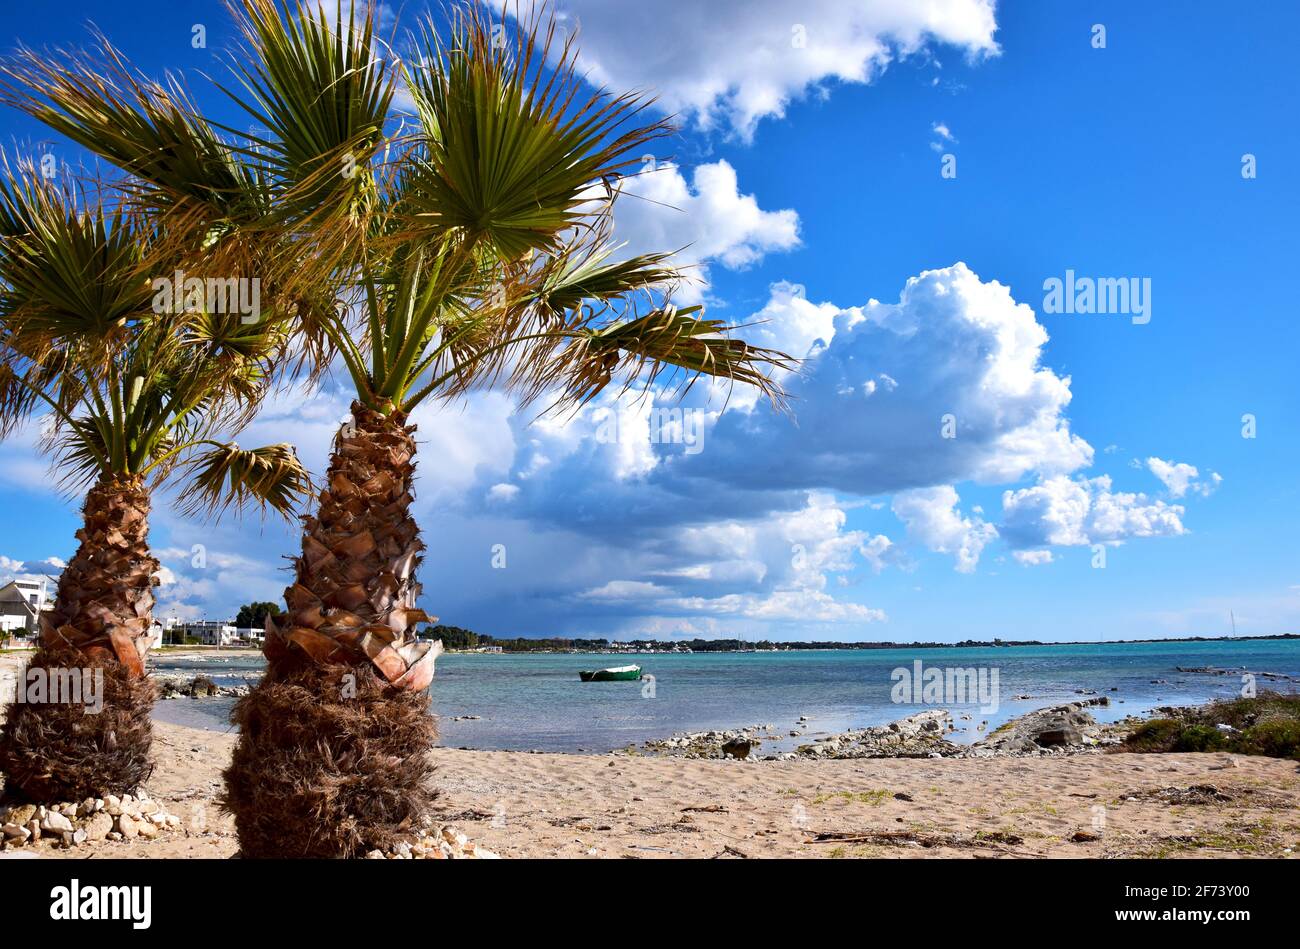 Palm trees by the beach Stock Photo